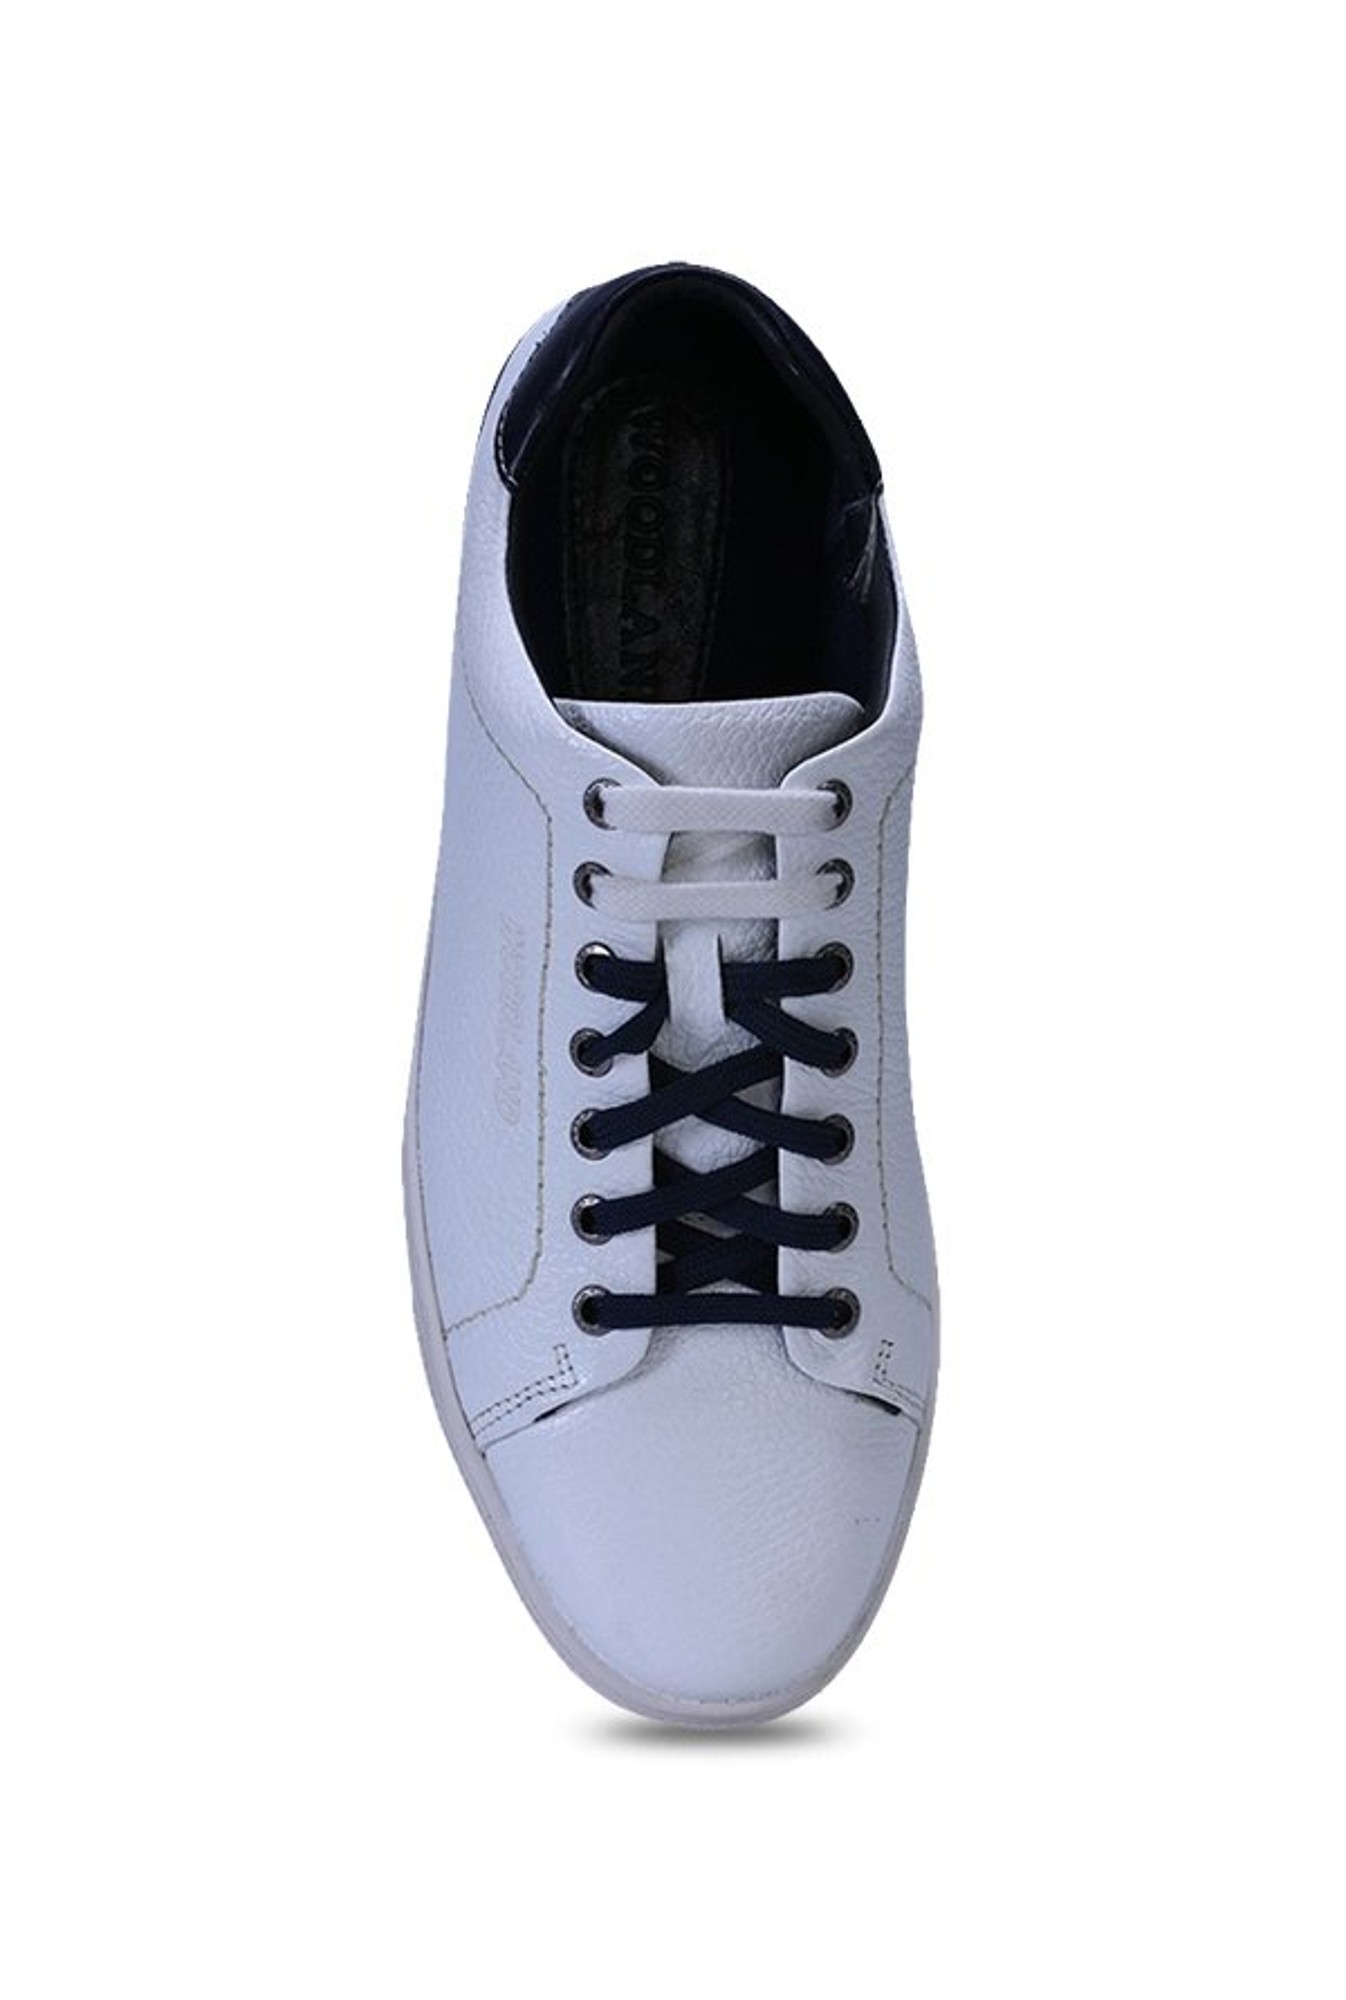 woodland white casual shoes